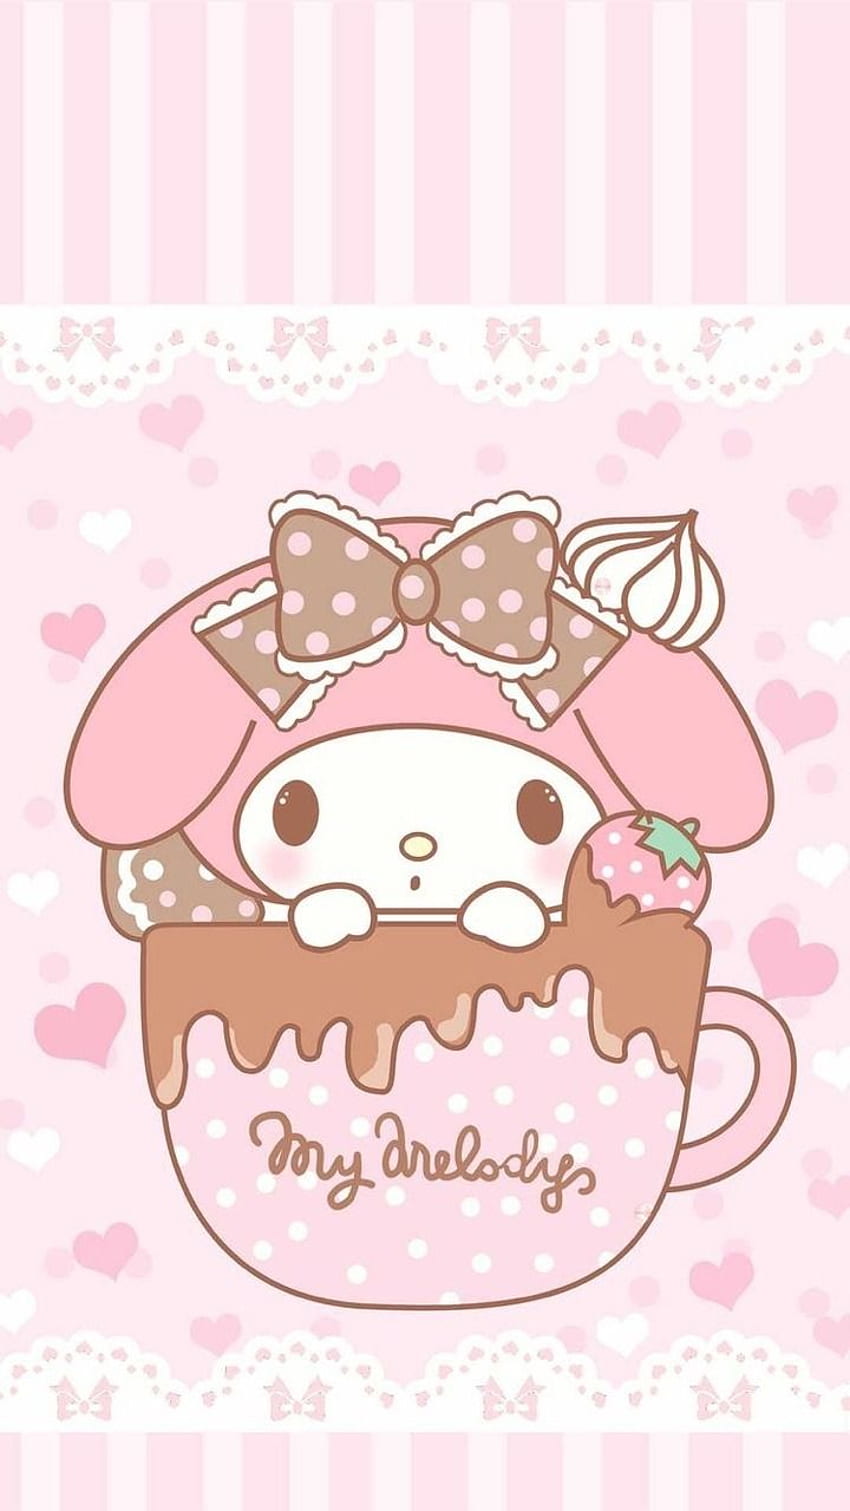  Be Positive   SANRIO WALLPAPERS